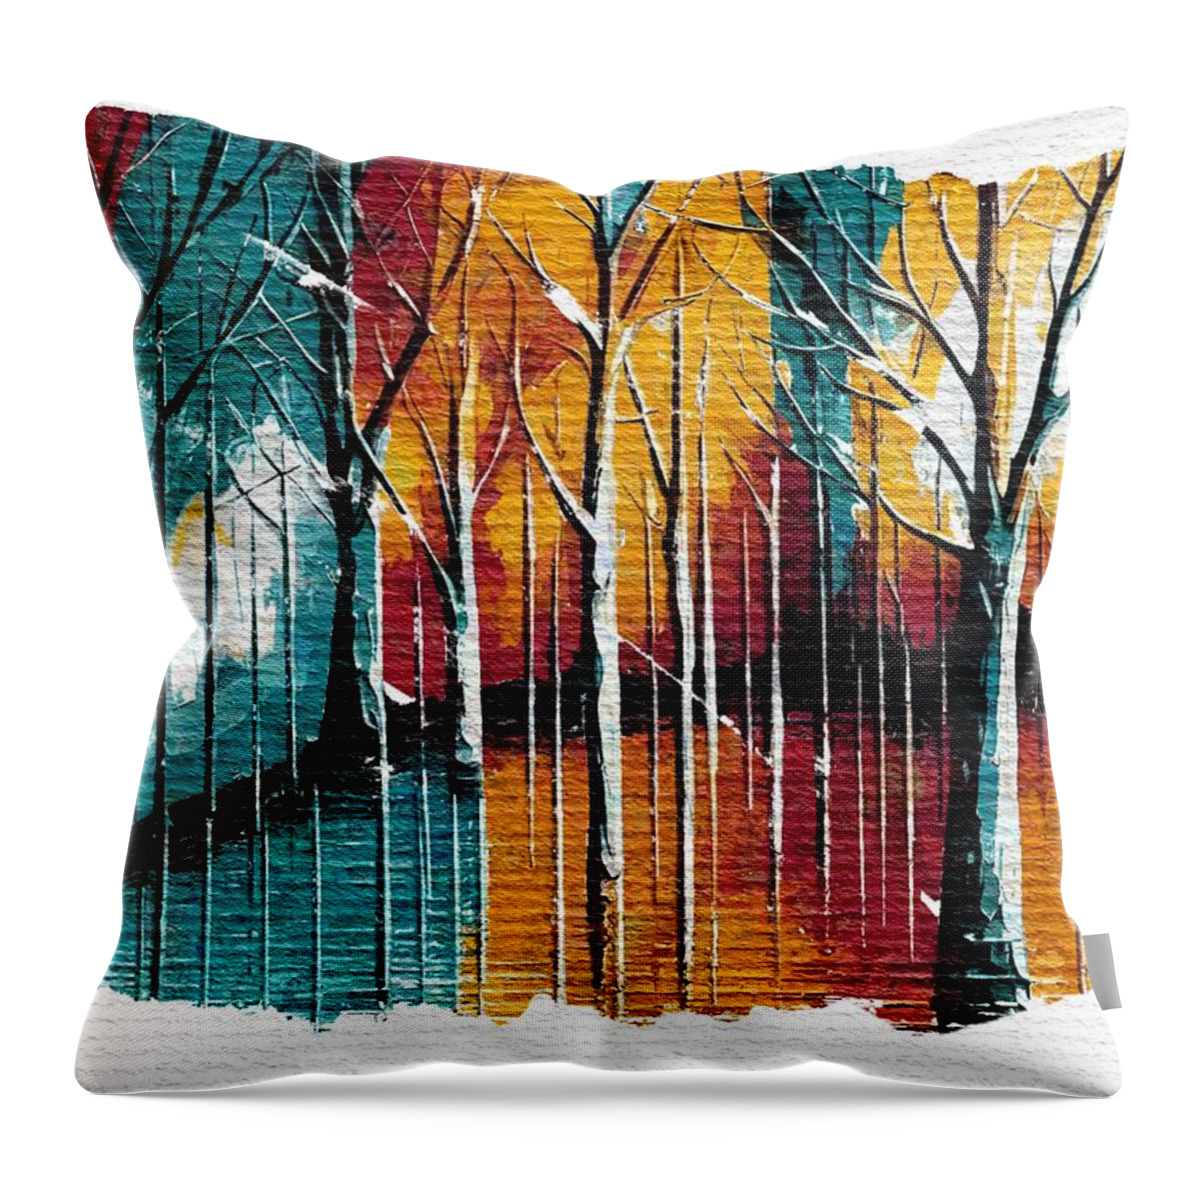 Rebound Throw Pillow featuring the mixed media Rebound Art No2 - colorful forest by Bonnie Bruno